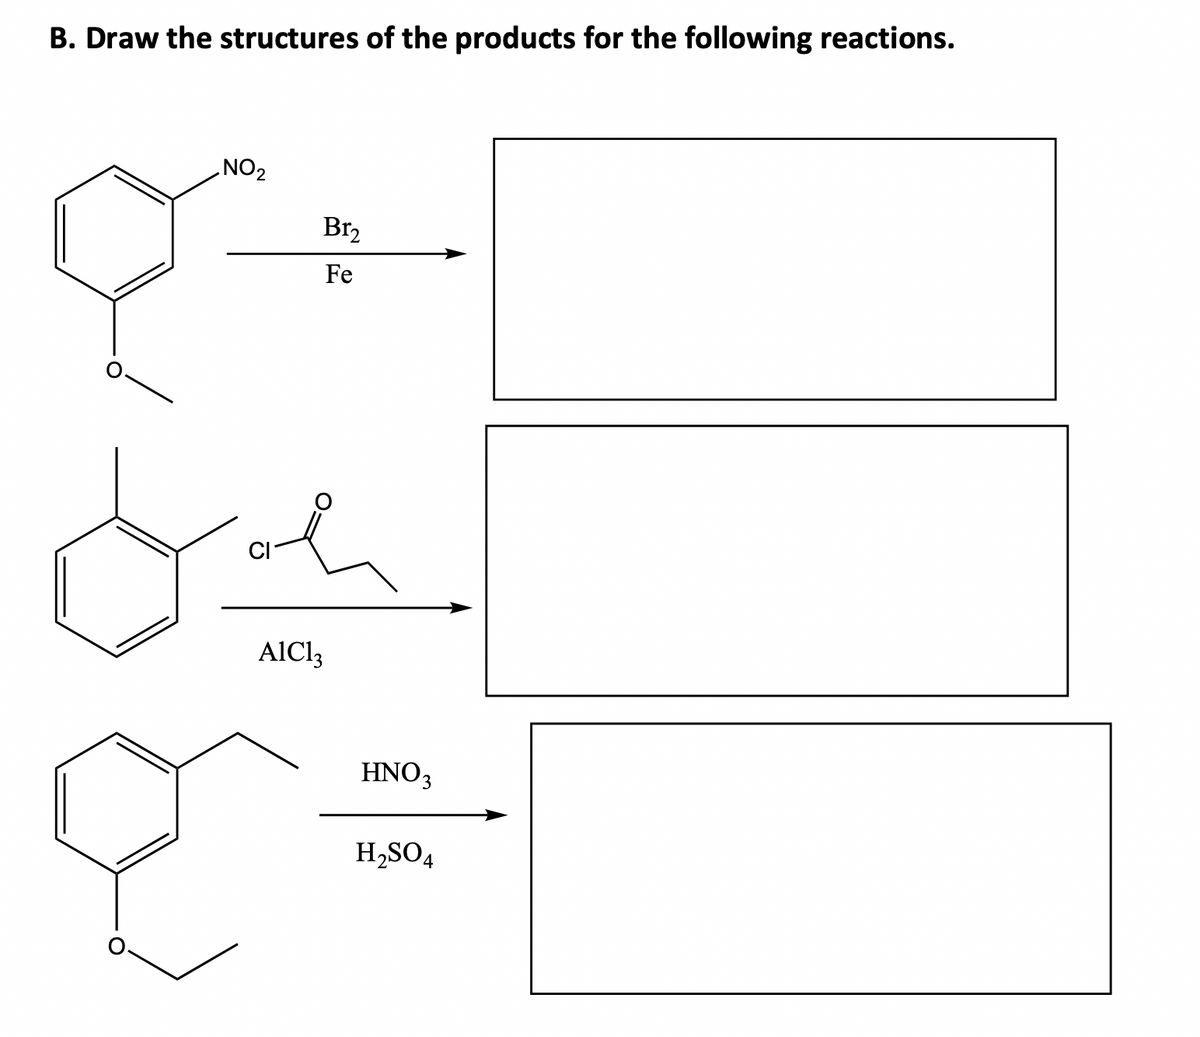 B. Draw the structures of the products for the following reactions.
NO₂
Br₂
Fe
AlCl3
HNO3
H₂SO4